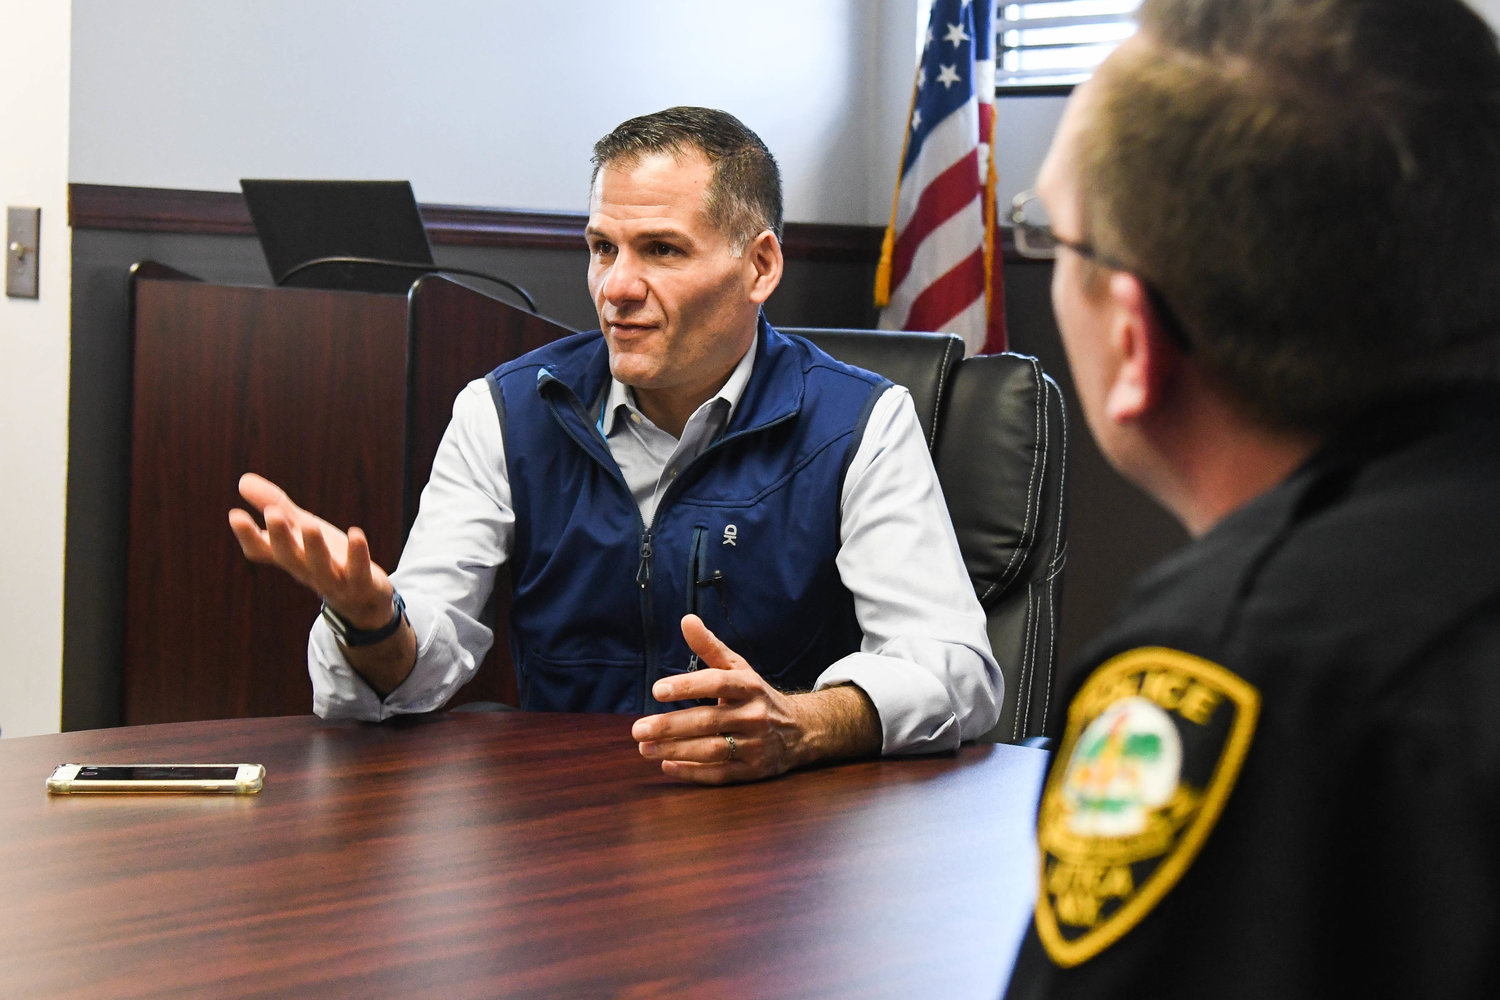 CANDIDATE IN UTICA — Marc Molinaro, a Republican candidate for the newly drawn NY-19 district for U.S. Congress, stopped by the Utica Police Department on Tuesday to talk with department and union leadership. He was joined by John Salka, who is running for New York State Senate.